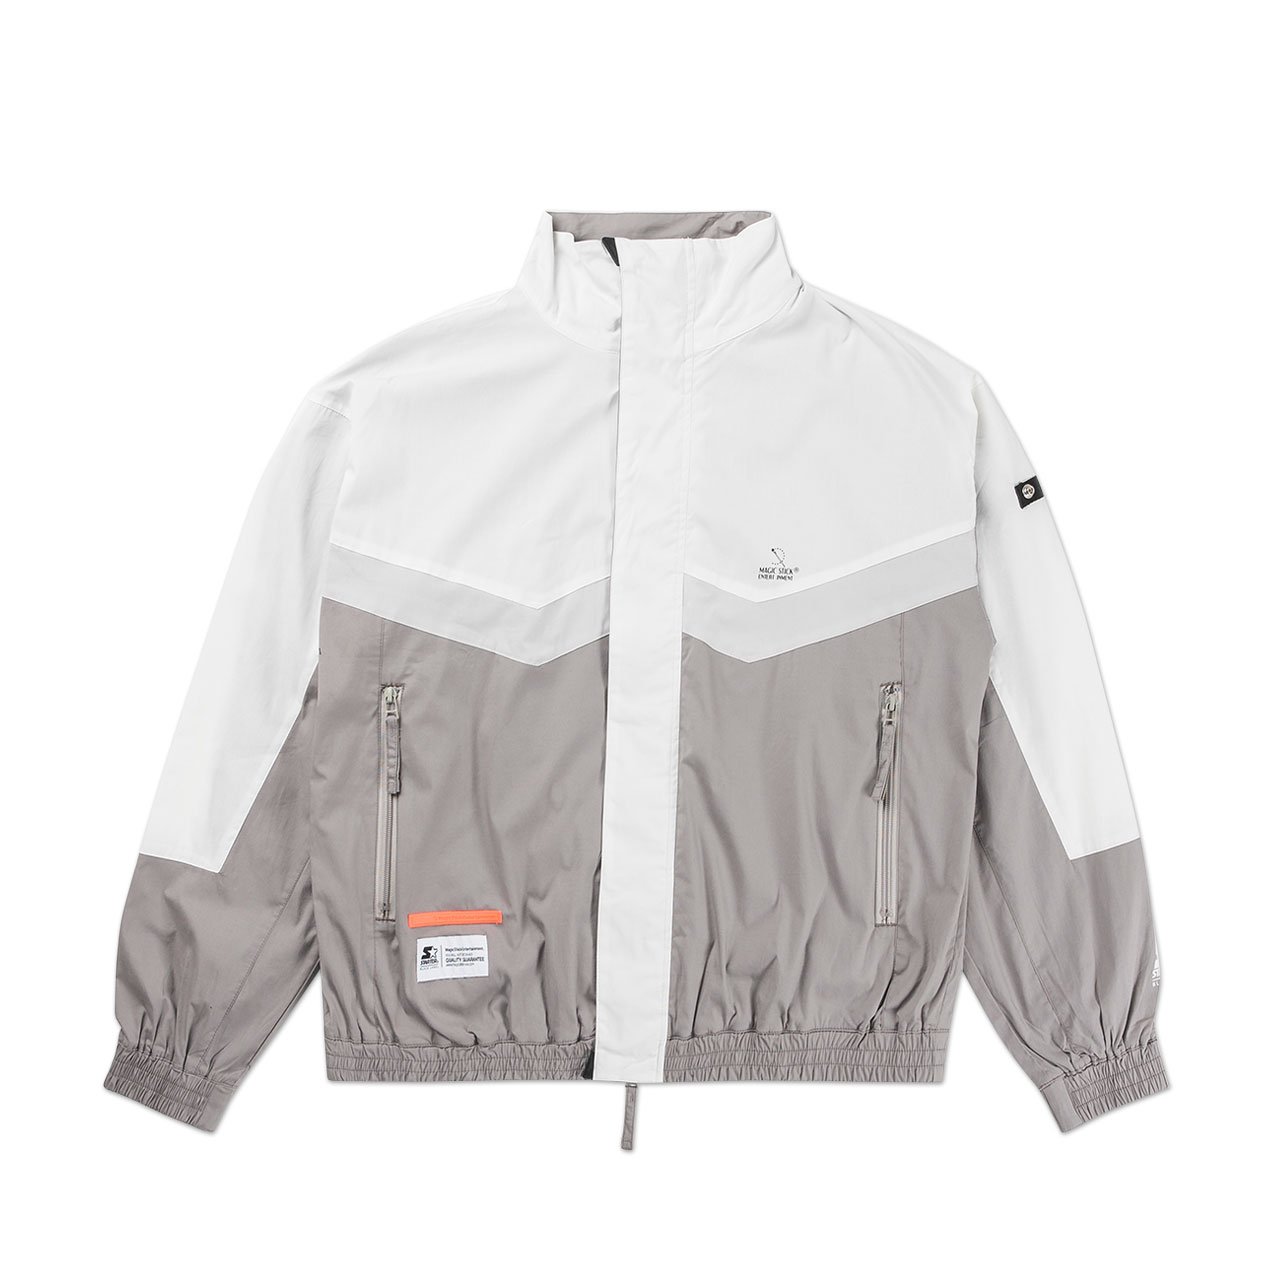 magic stick summer truck jacket by starter black label (grey) - 20fw-ms7-001 - a.plus - Image - 1